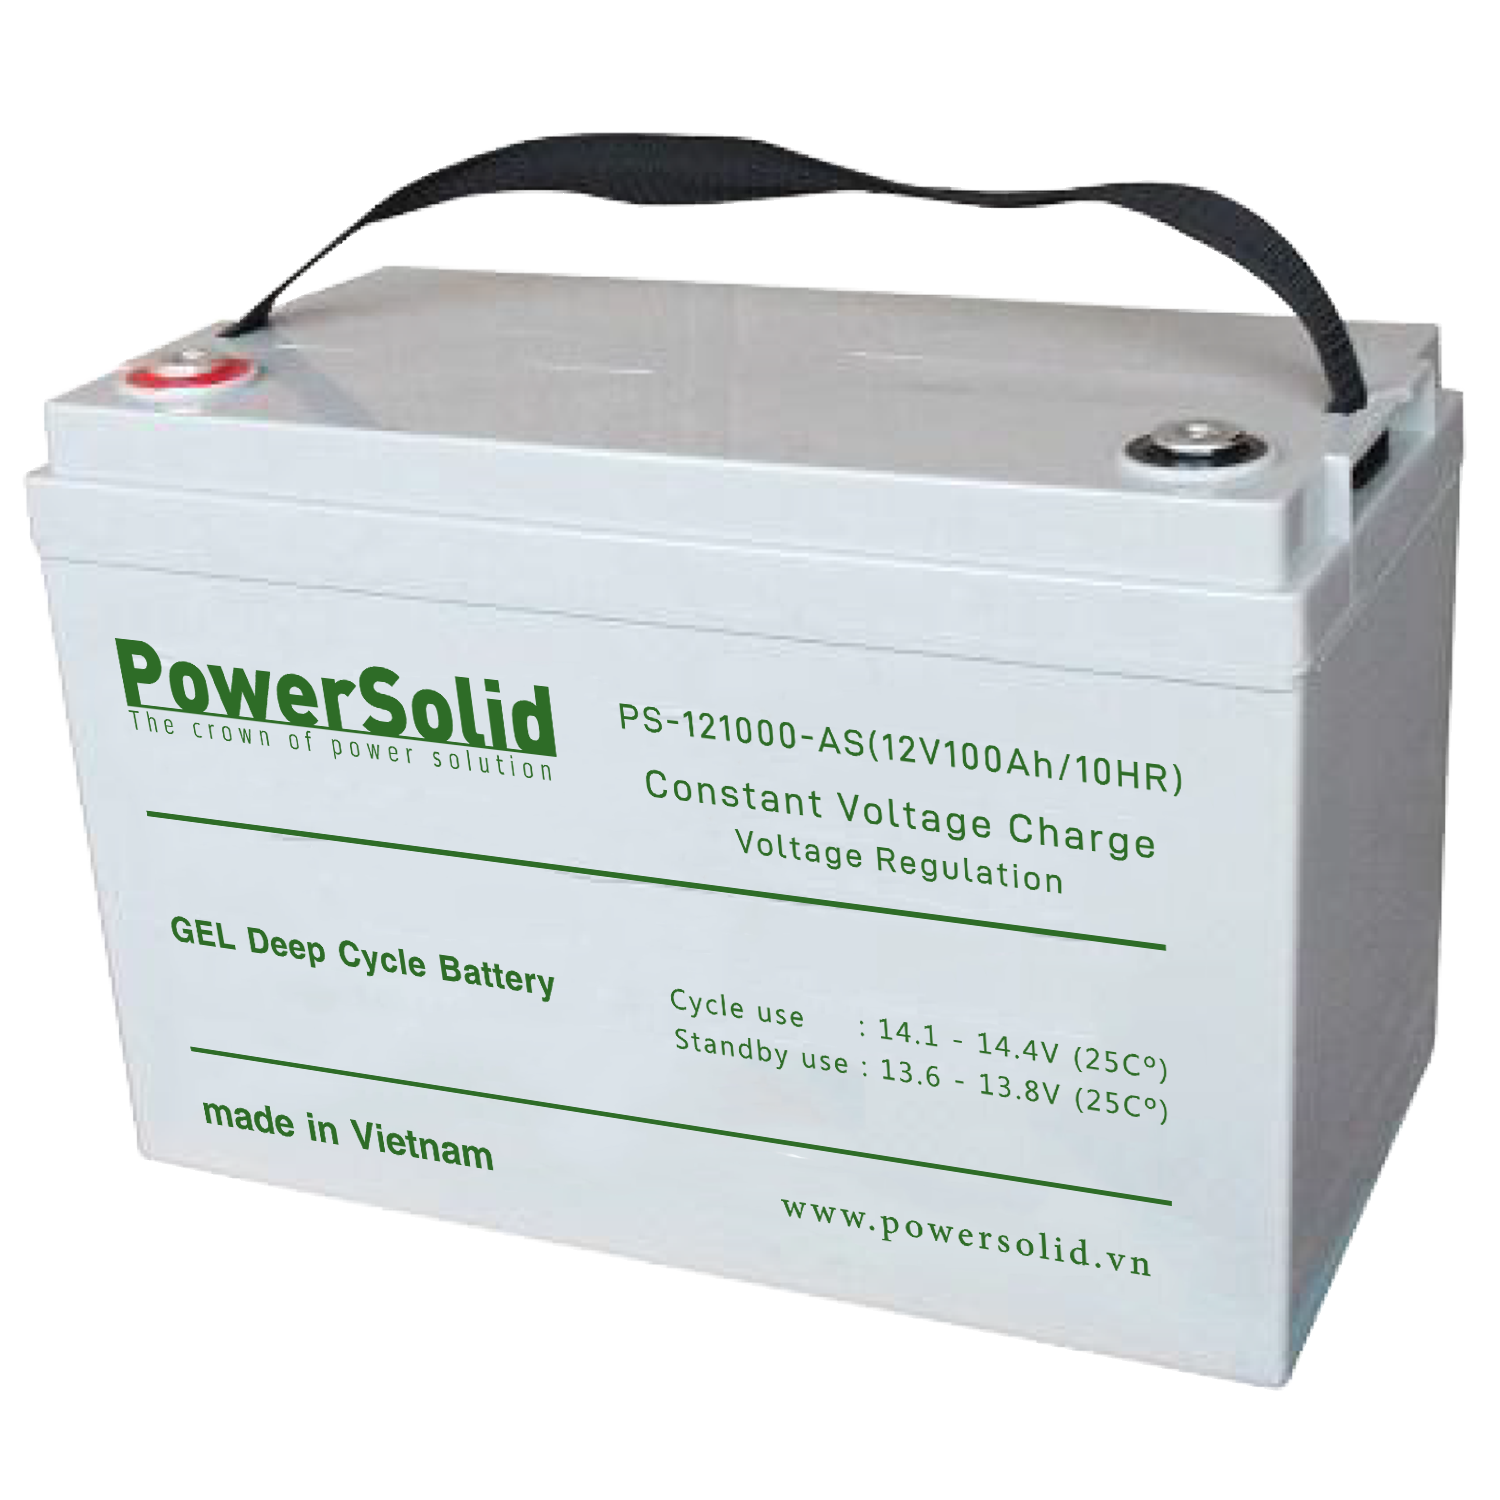 Power Solid PS-121000-GS GEL Deep Cycle Battery 12V 100Ah